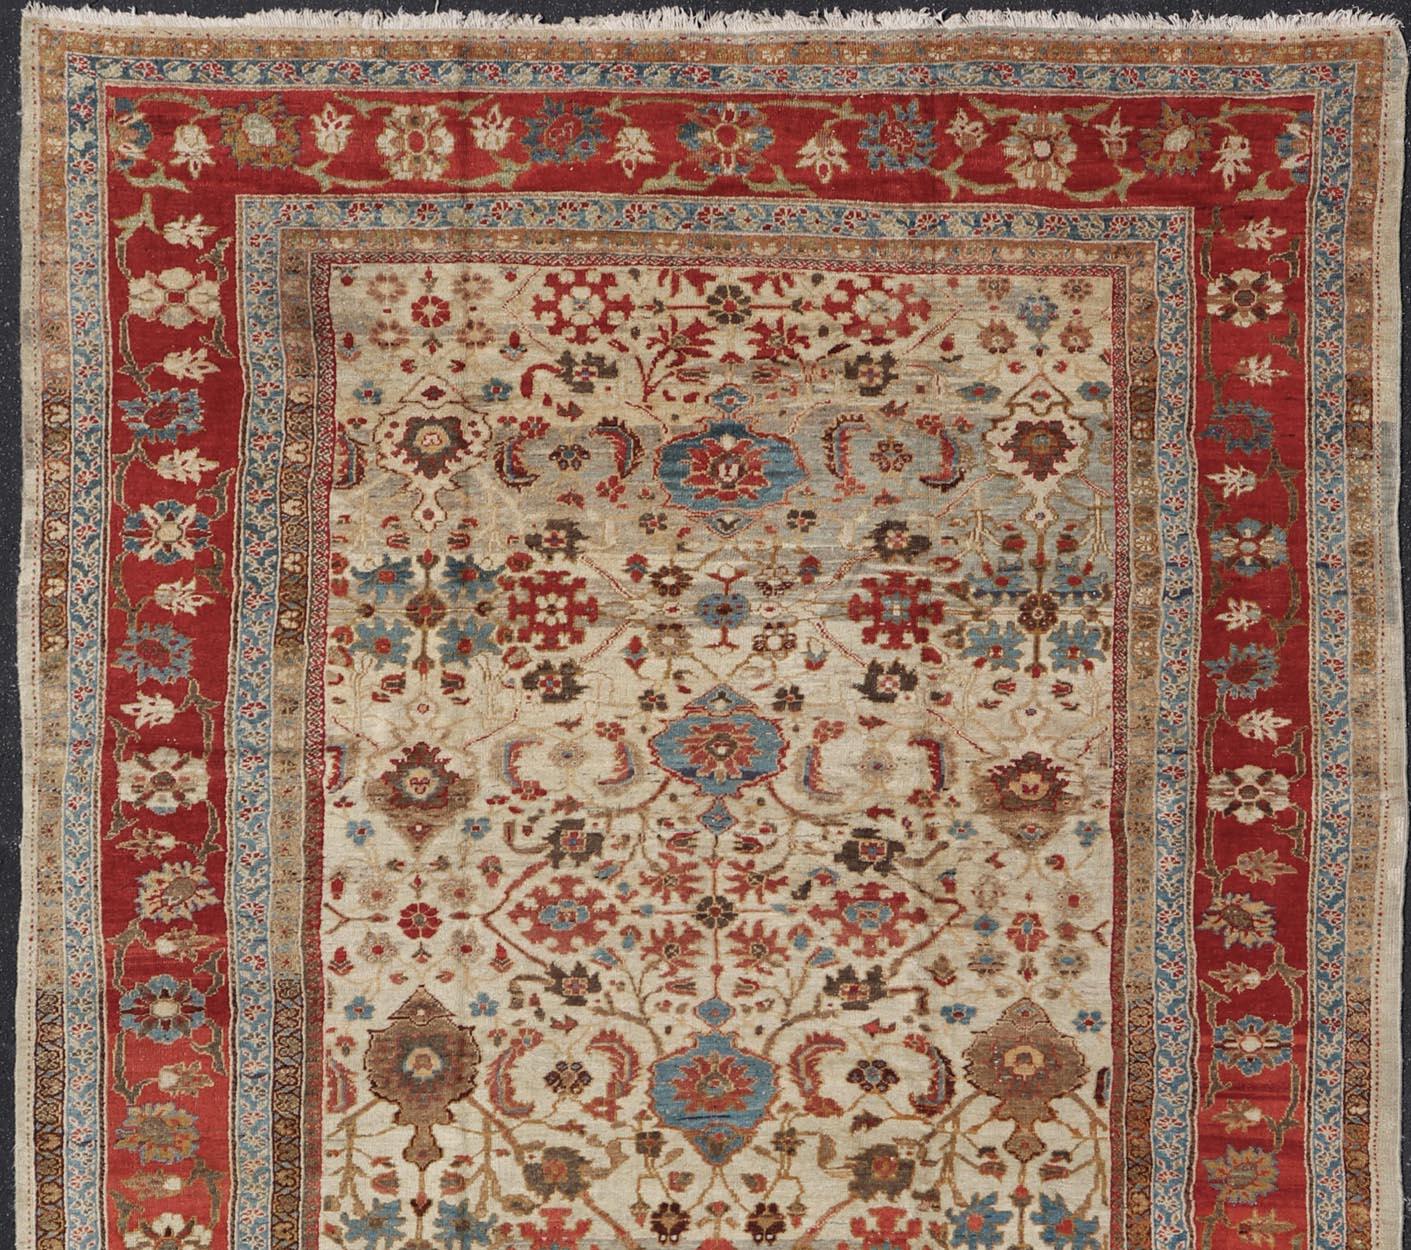 Antique Persian Sultanabad Ziegler Carpet with Rich Palmettes in Ivory Field and red border. Keivan Woven Arts /  rug 17-0302, country of origin / type: Iran / Ziegler Sultanabad, circa 1900. 

Measures: 10'8 x 16'6.        

This exceptional